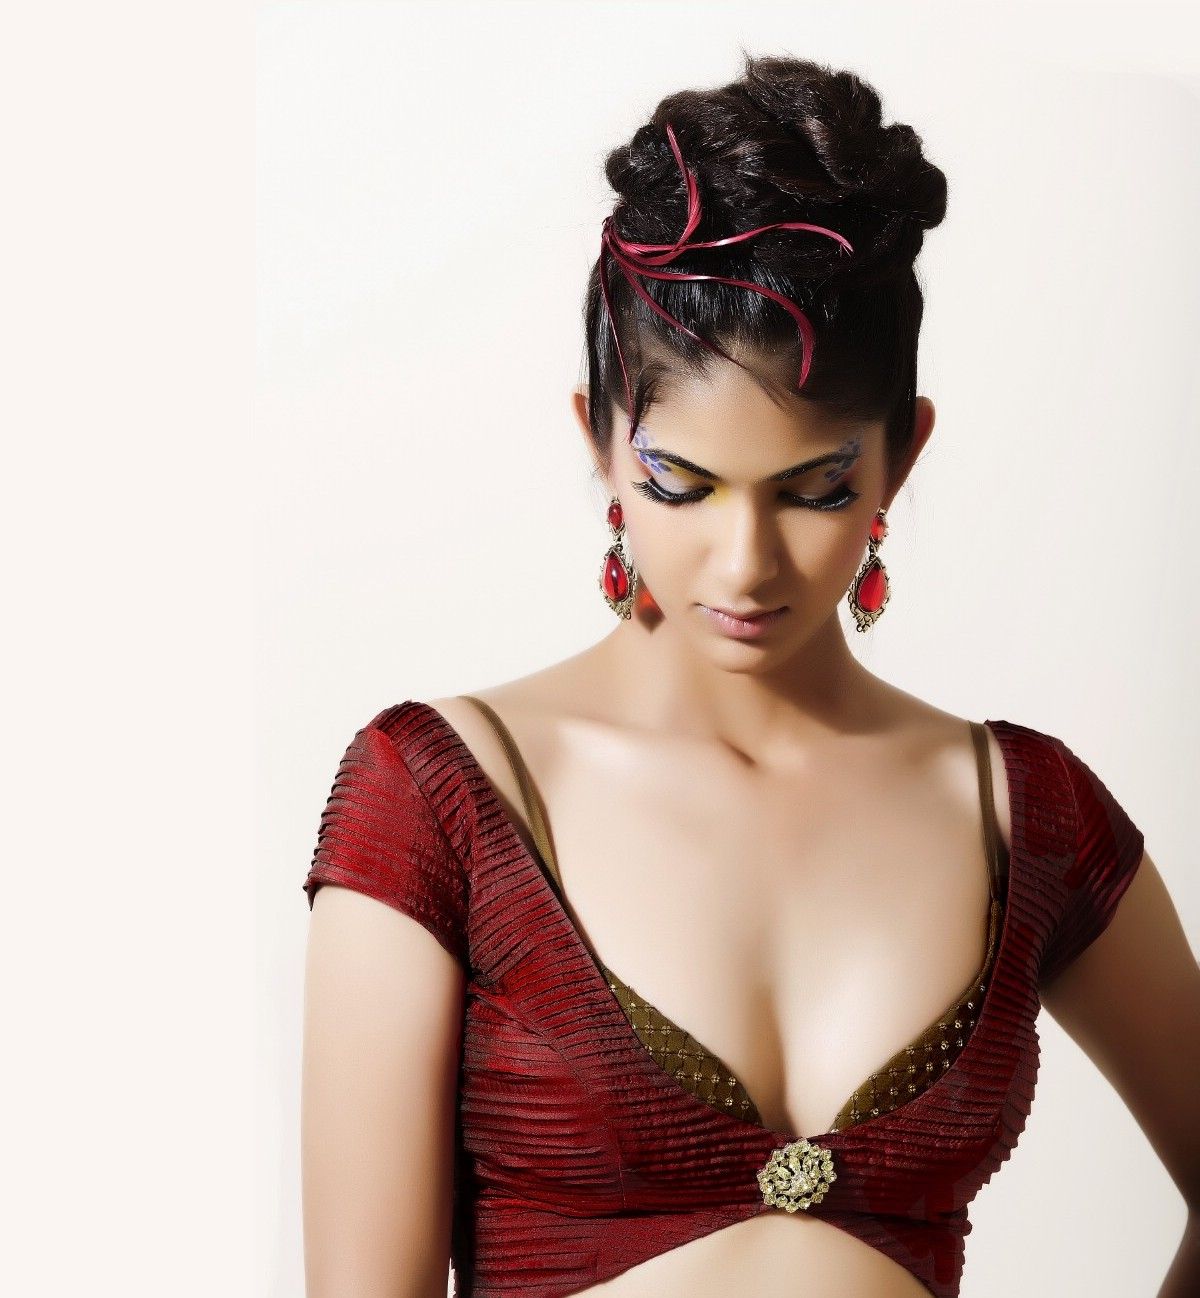 hot wallpaper indian,hair,clothing,red,maroon,brassiere